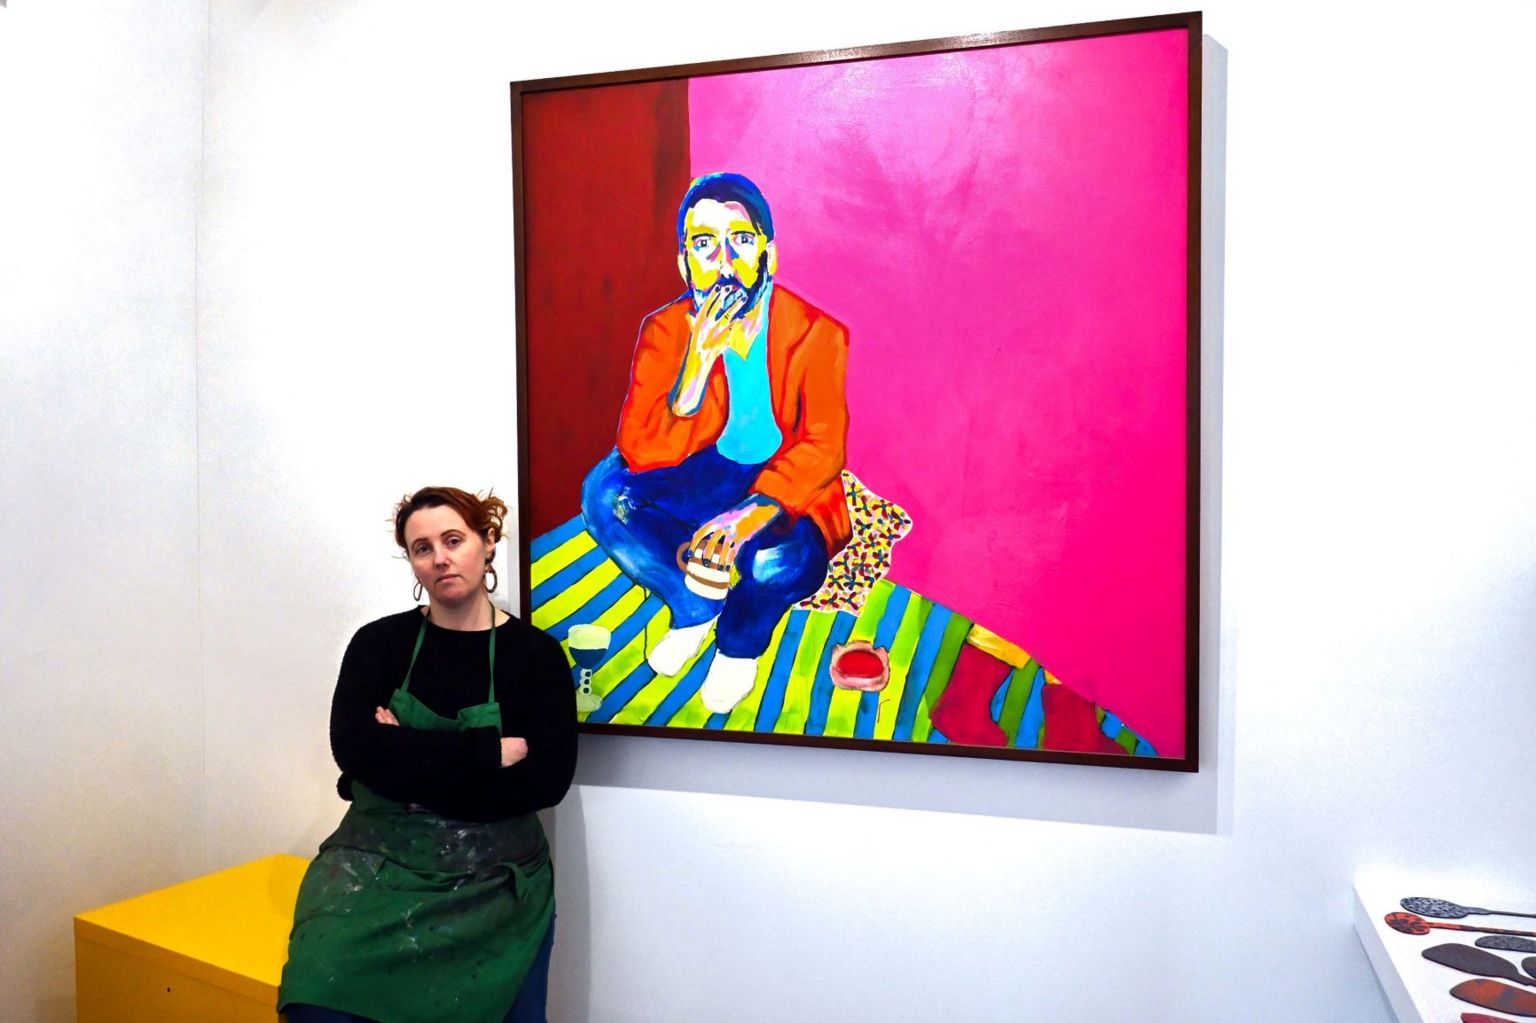 Natalie Chapman with one of her artworks